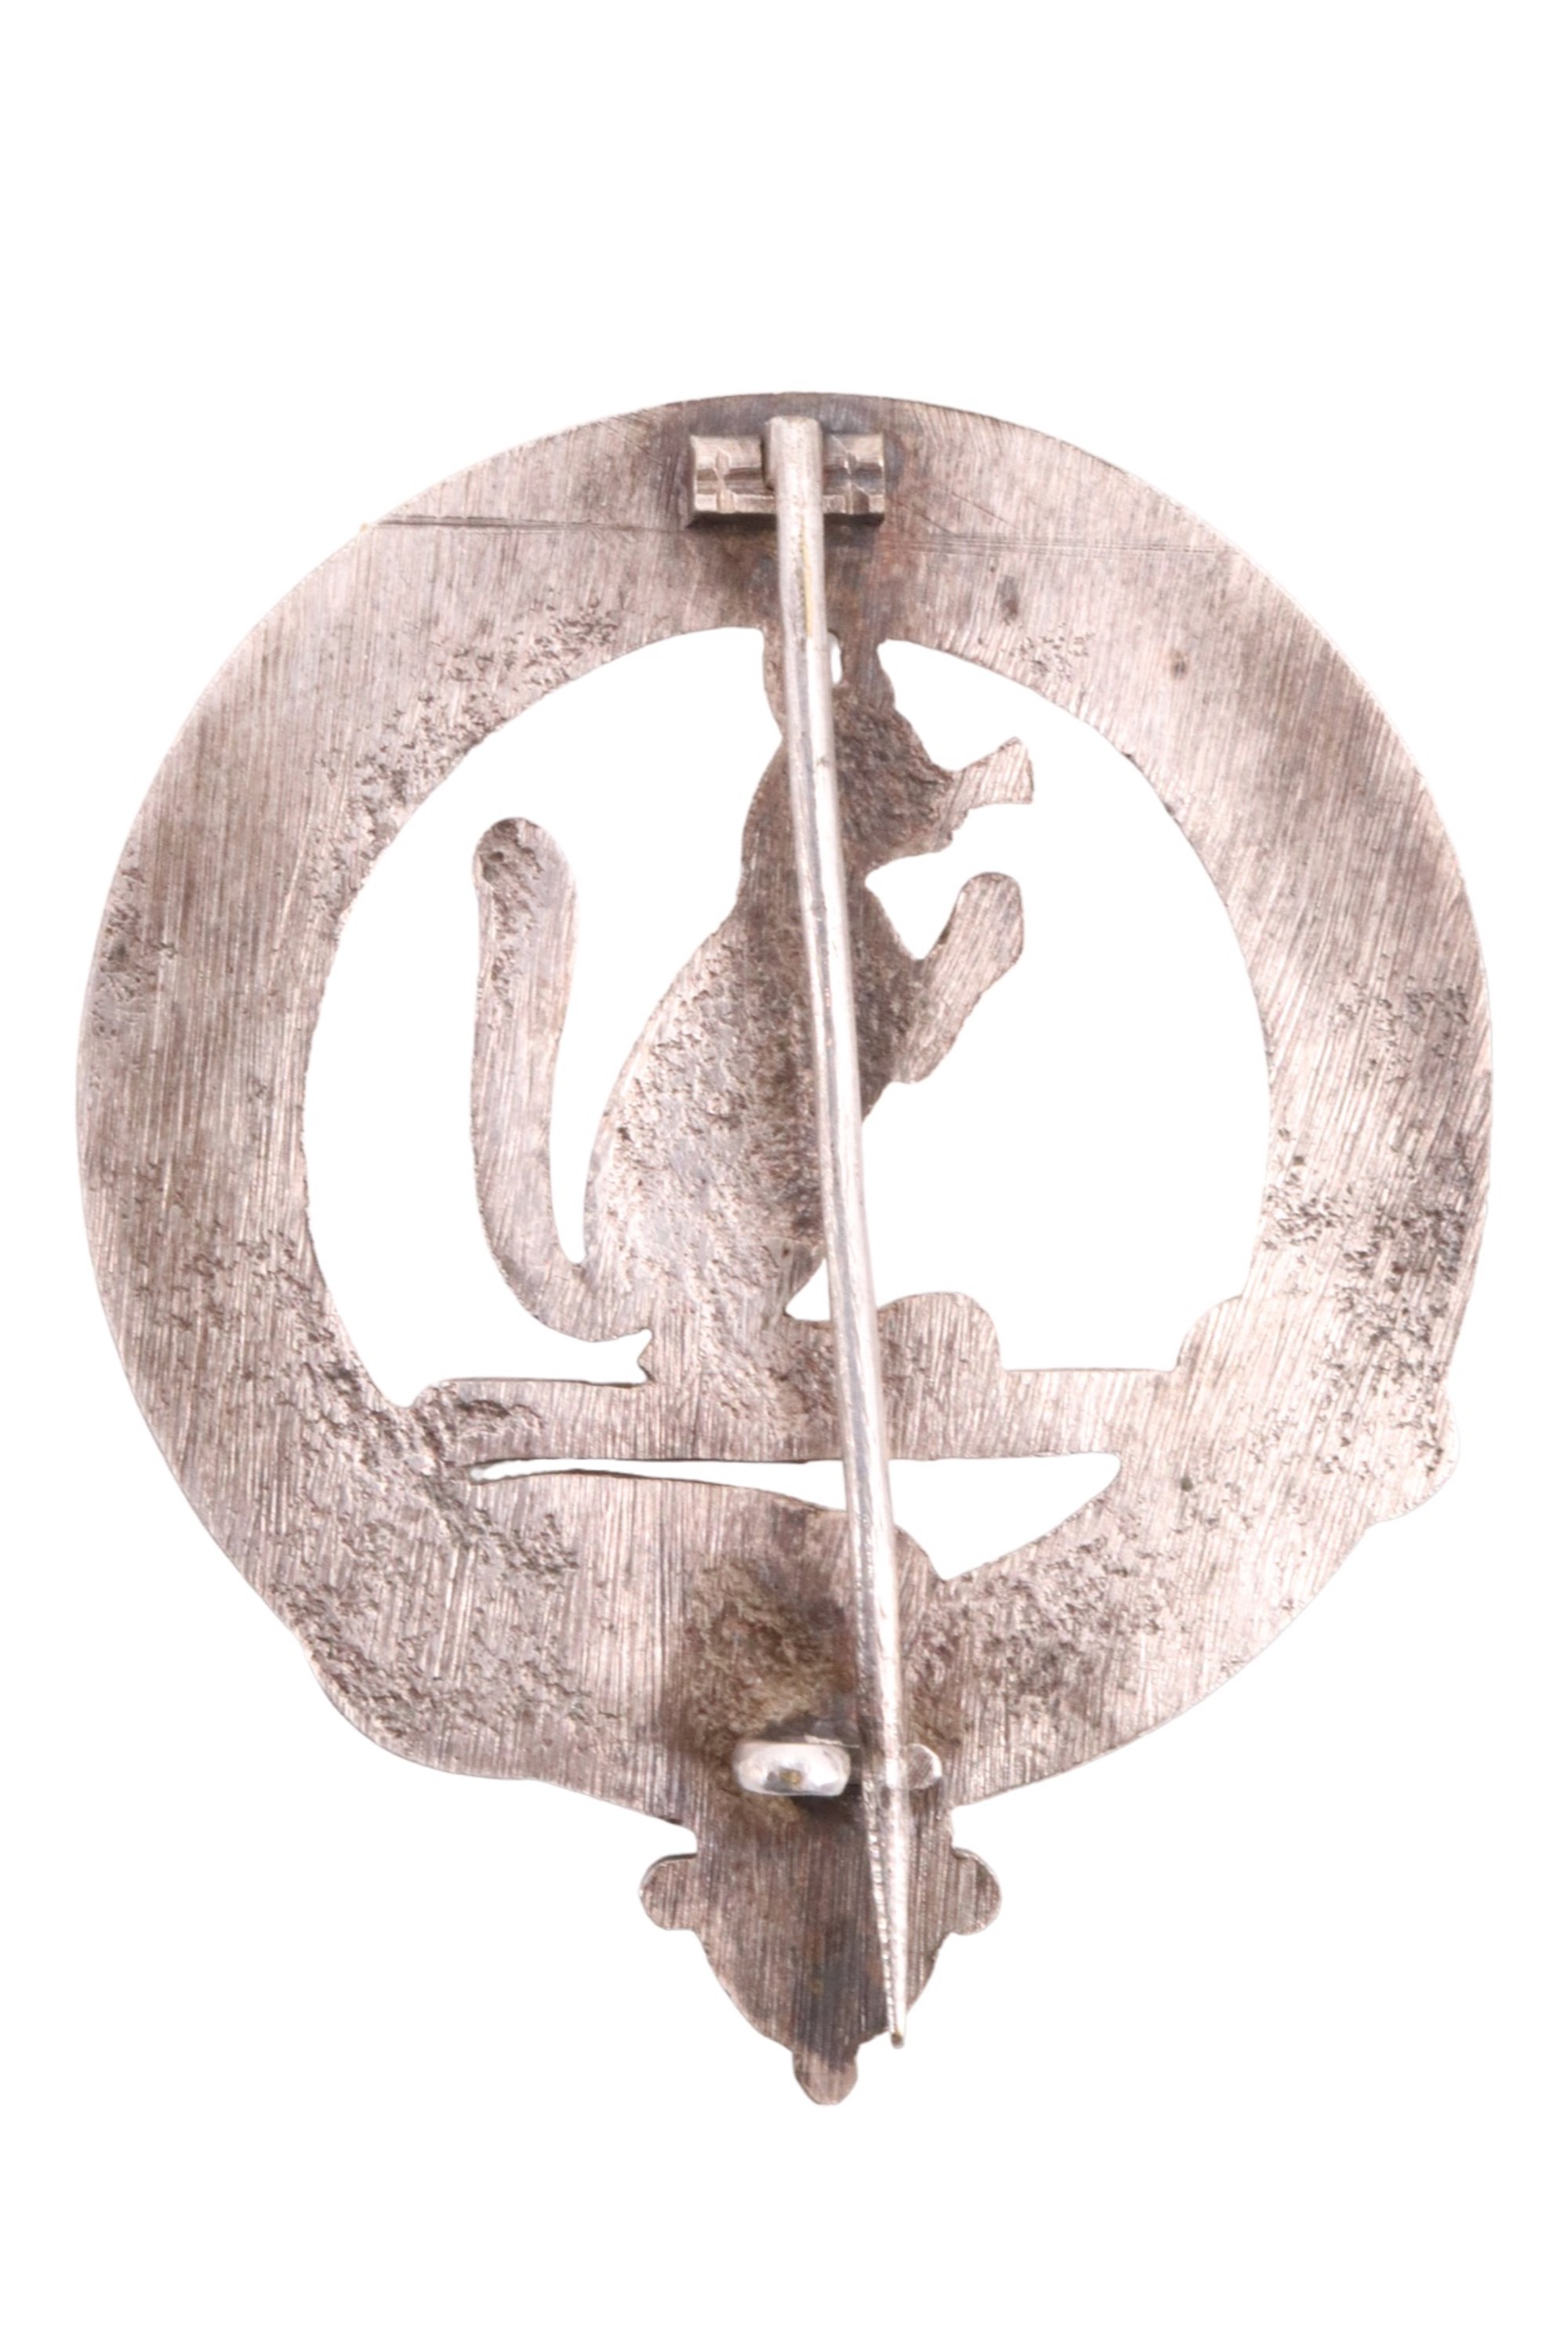 A Scottish clan brooch, 59 mm - Image 2 of 2